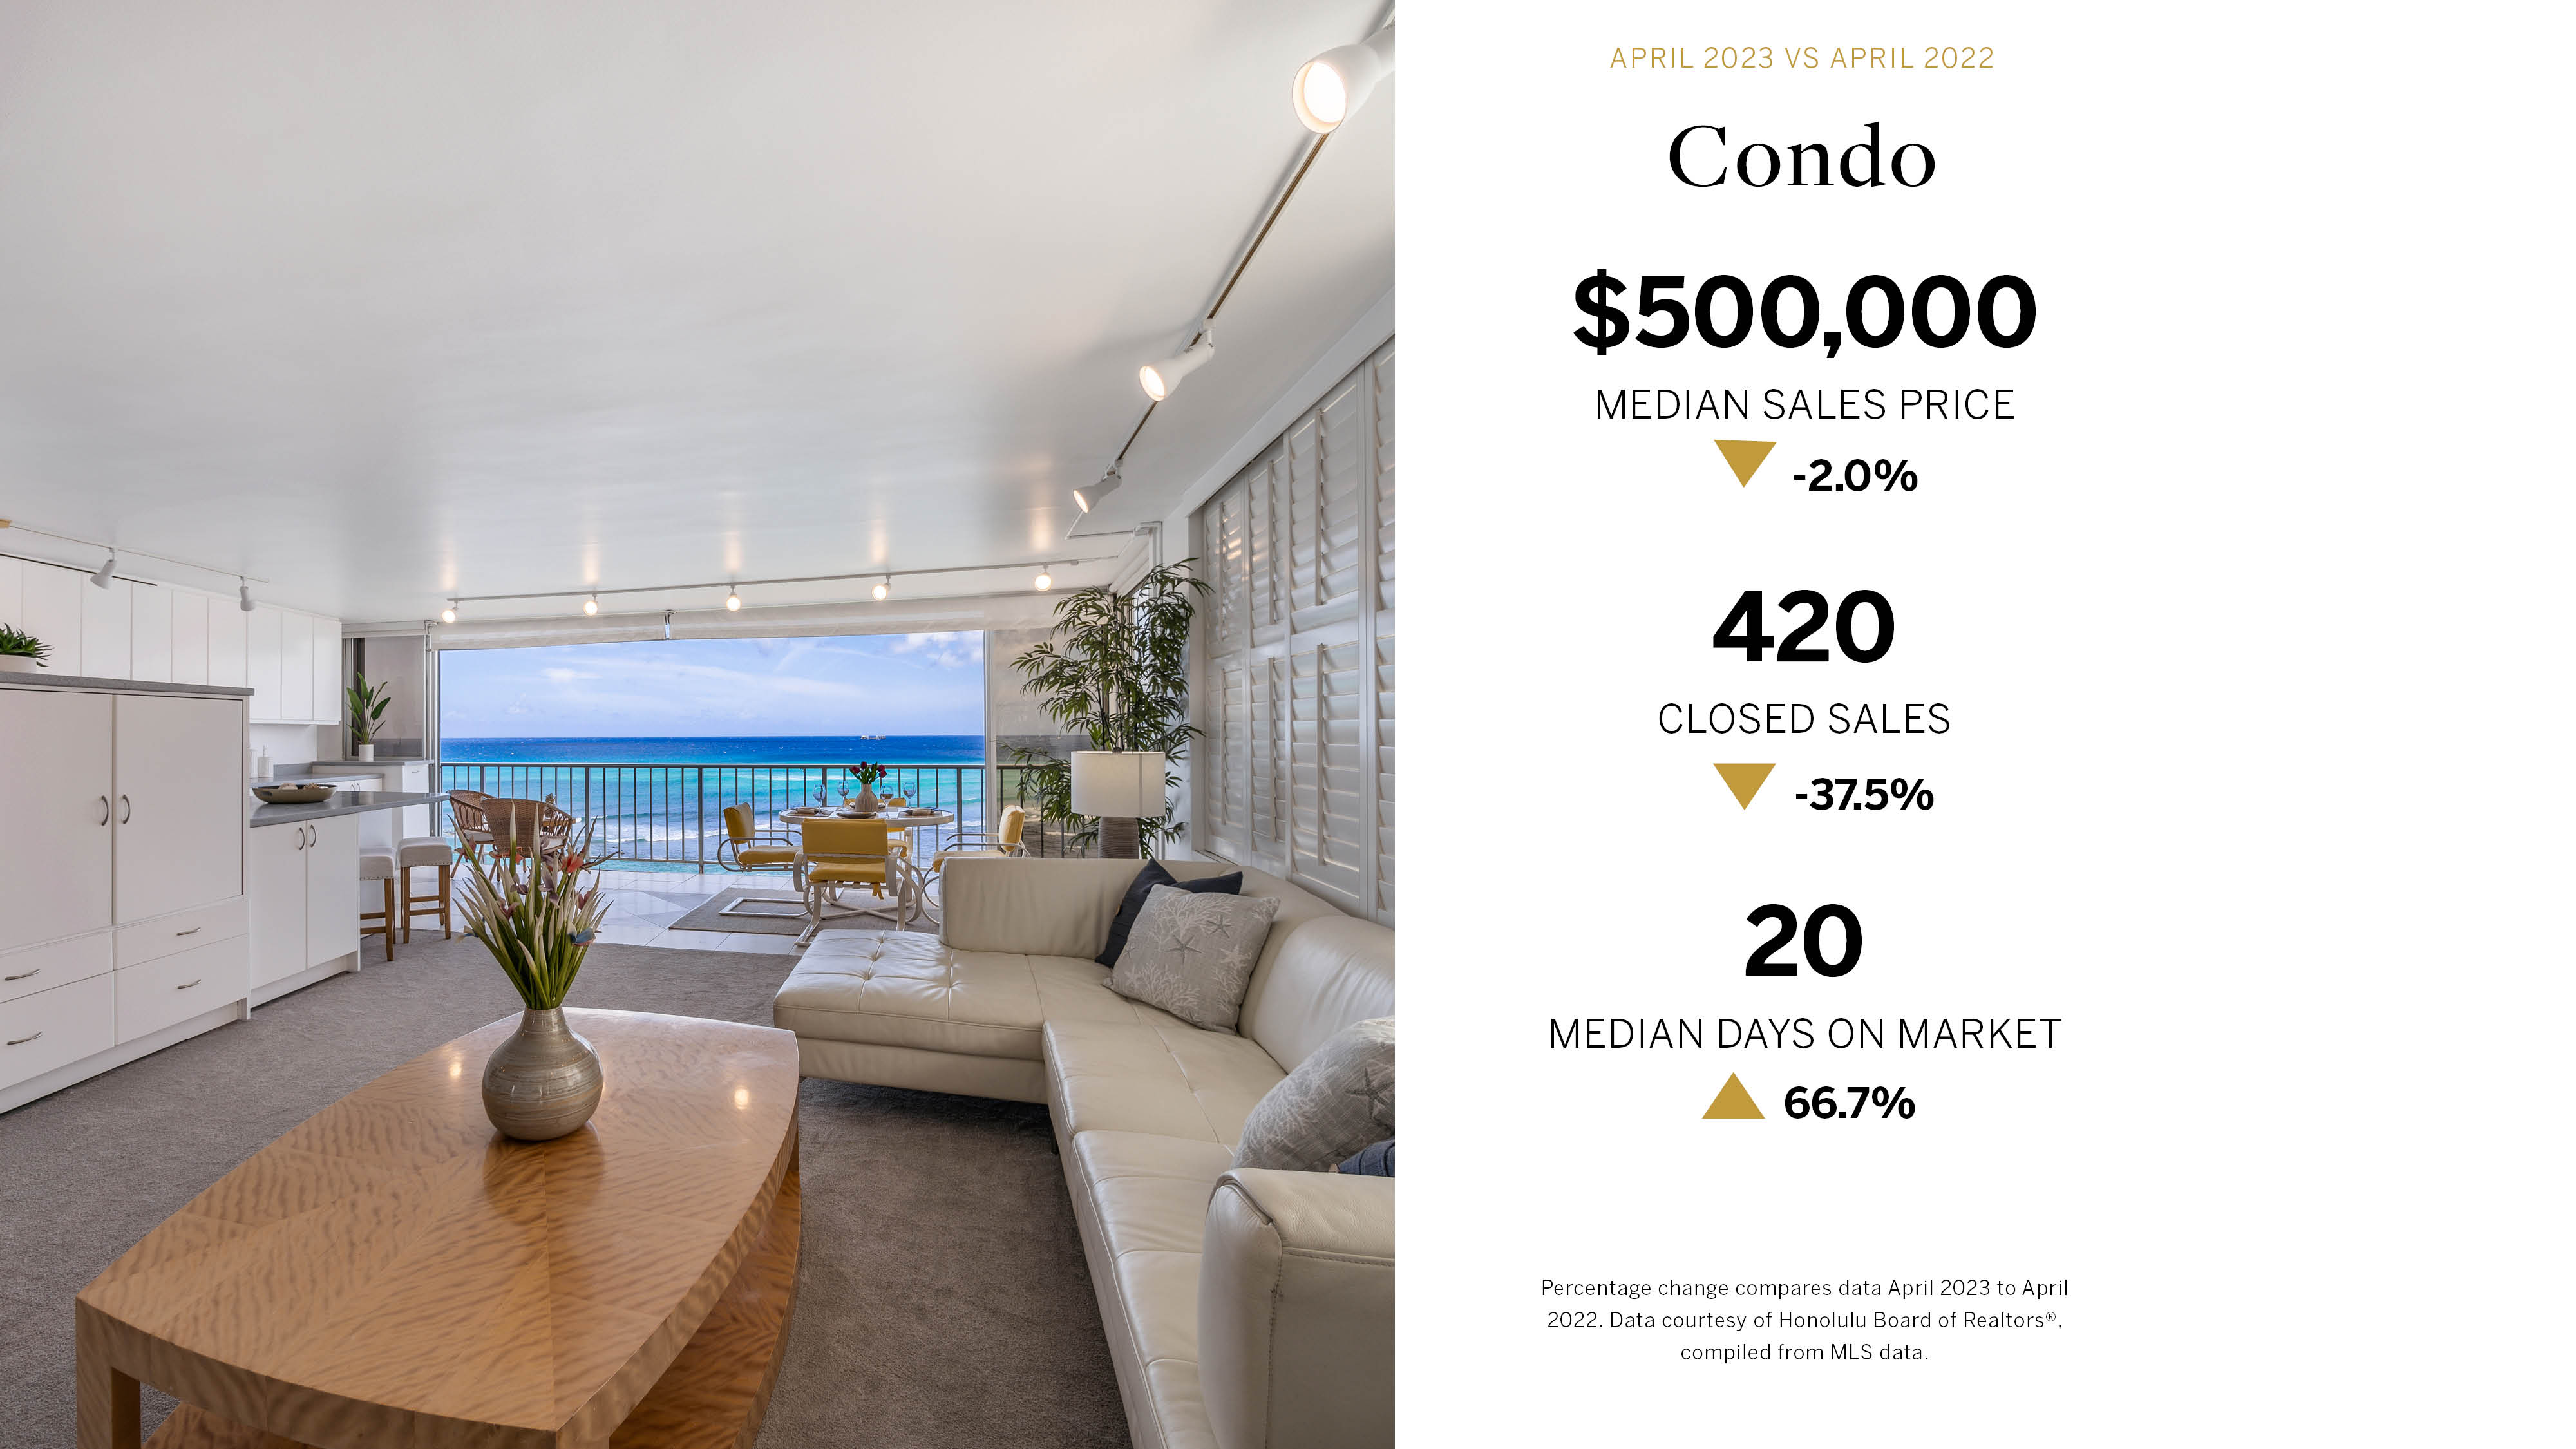 Oahu condo market stats with living room overlaid on left side